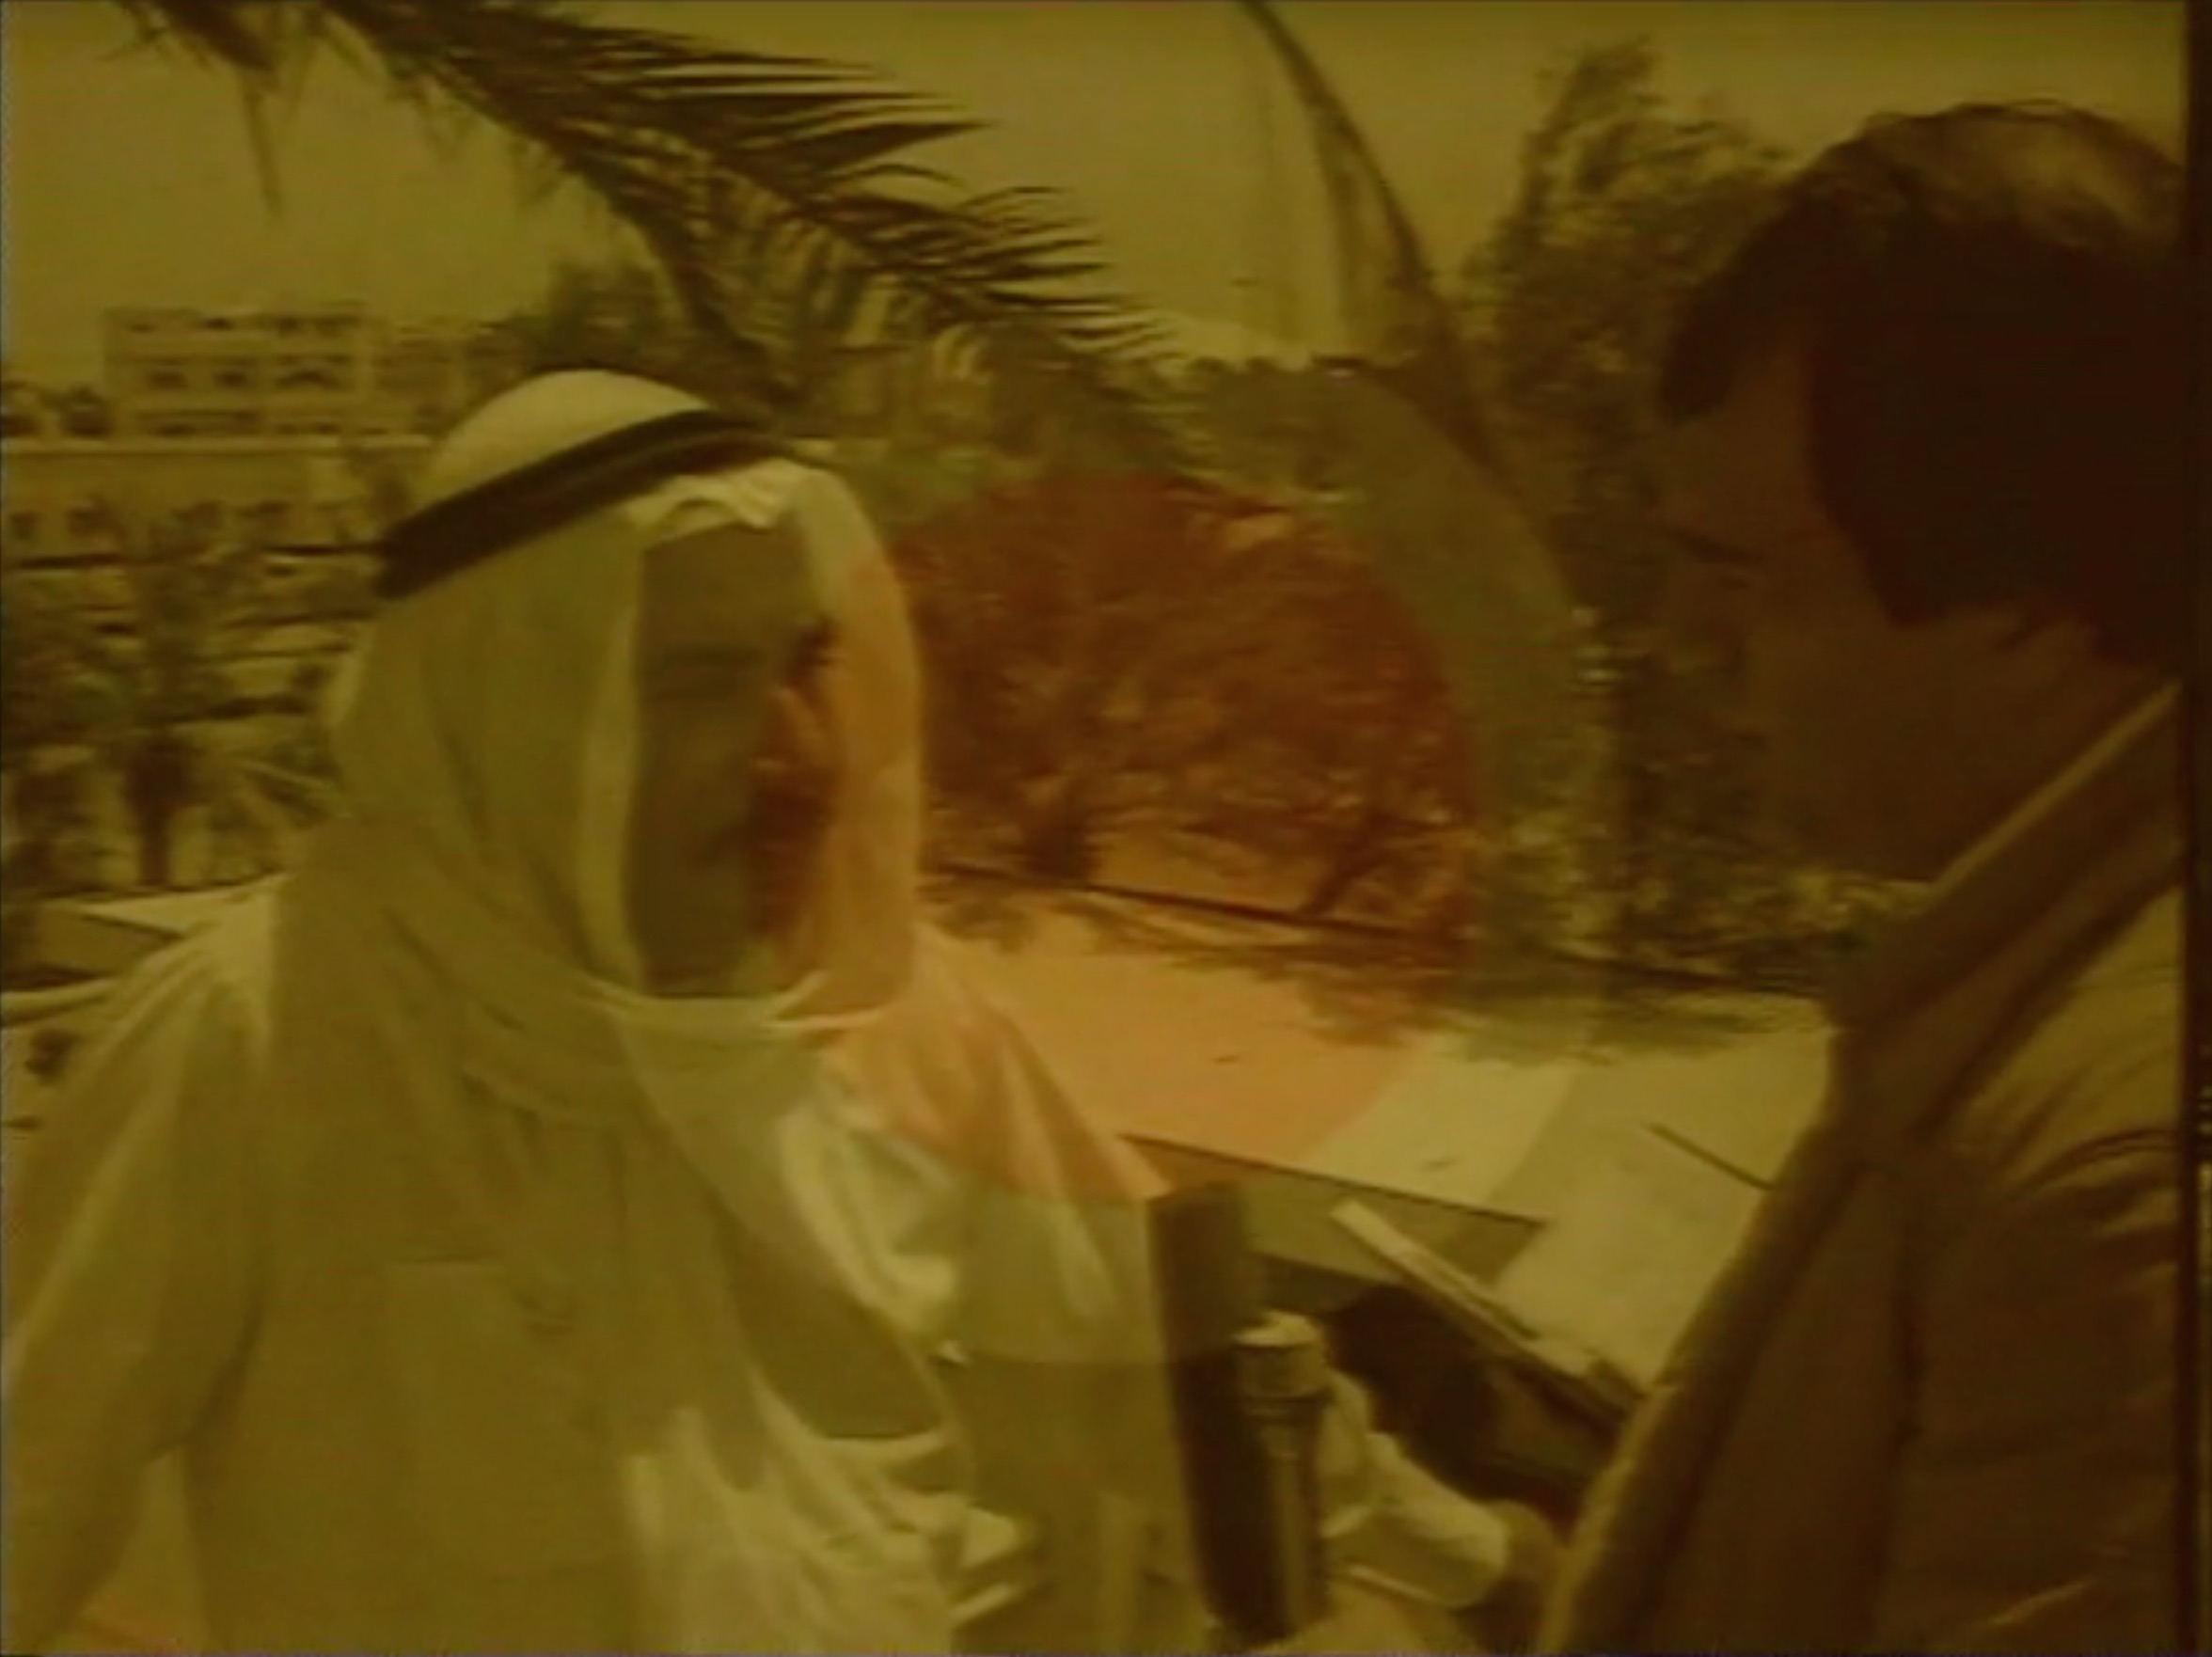 John Latham, still from The Gulf, video, 1984. From the series Targets, commissioned by Anna Ridley's Annalogue Productions for Channel 4 in as part of Dadarama. Courtesy Anna Ridley and the Artist (AND WHAT CAN WE SAY TO BE GOING ON NOW…?  0)